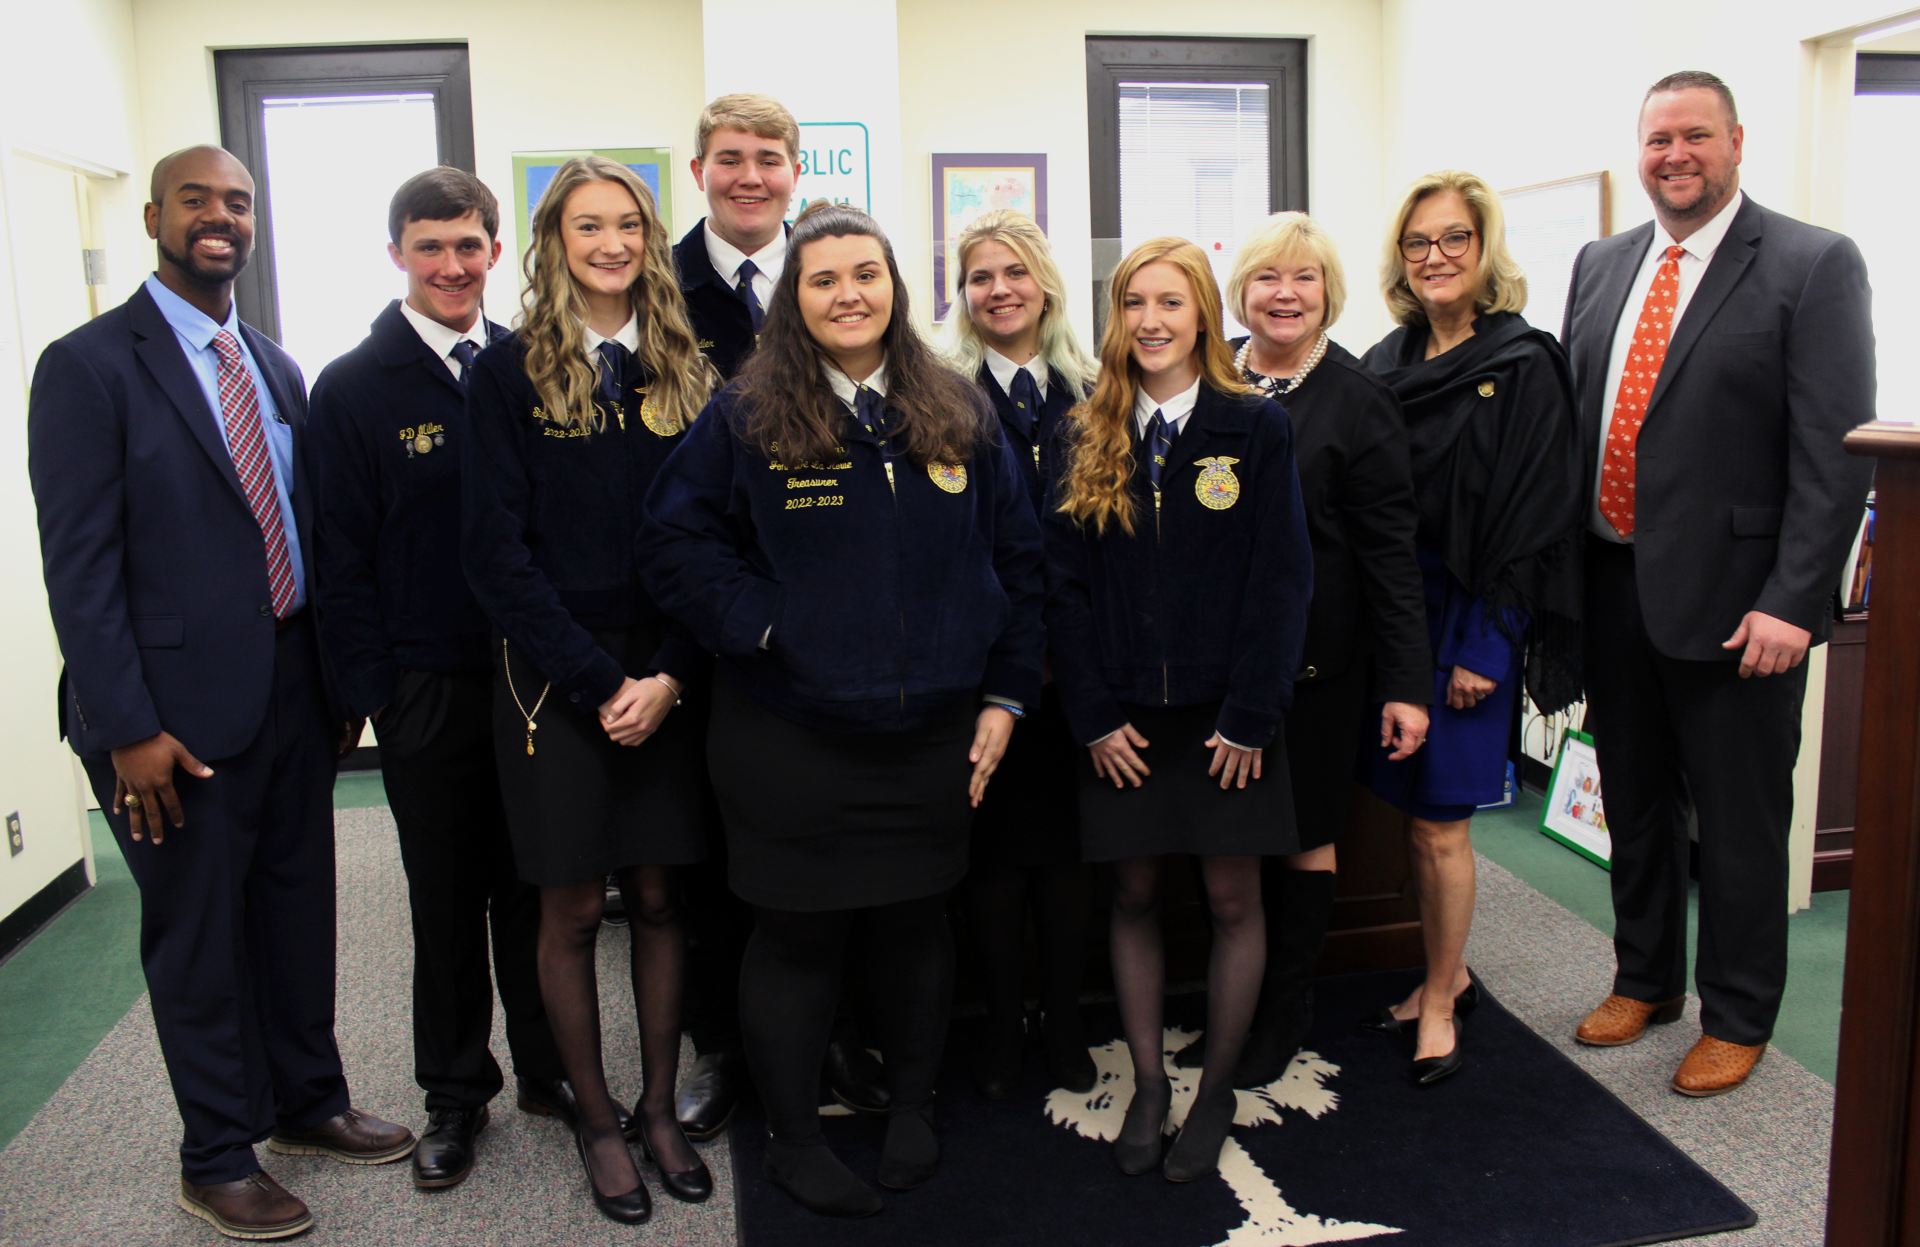 After the inauguration, Aggies visited State Rep. Shannon Erickson.